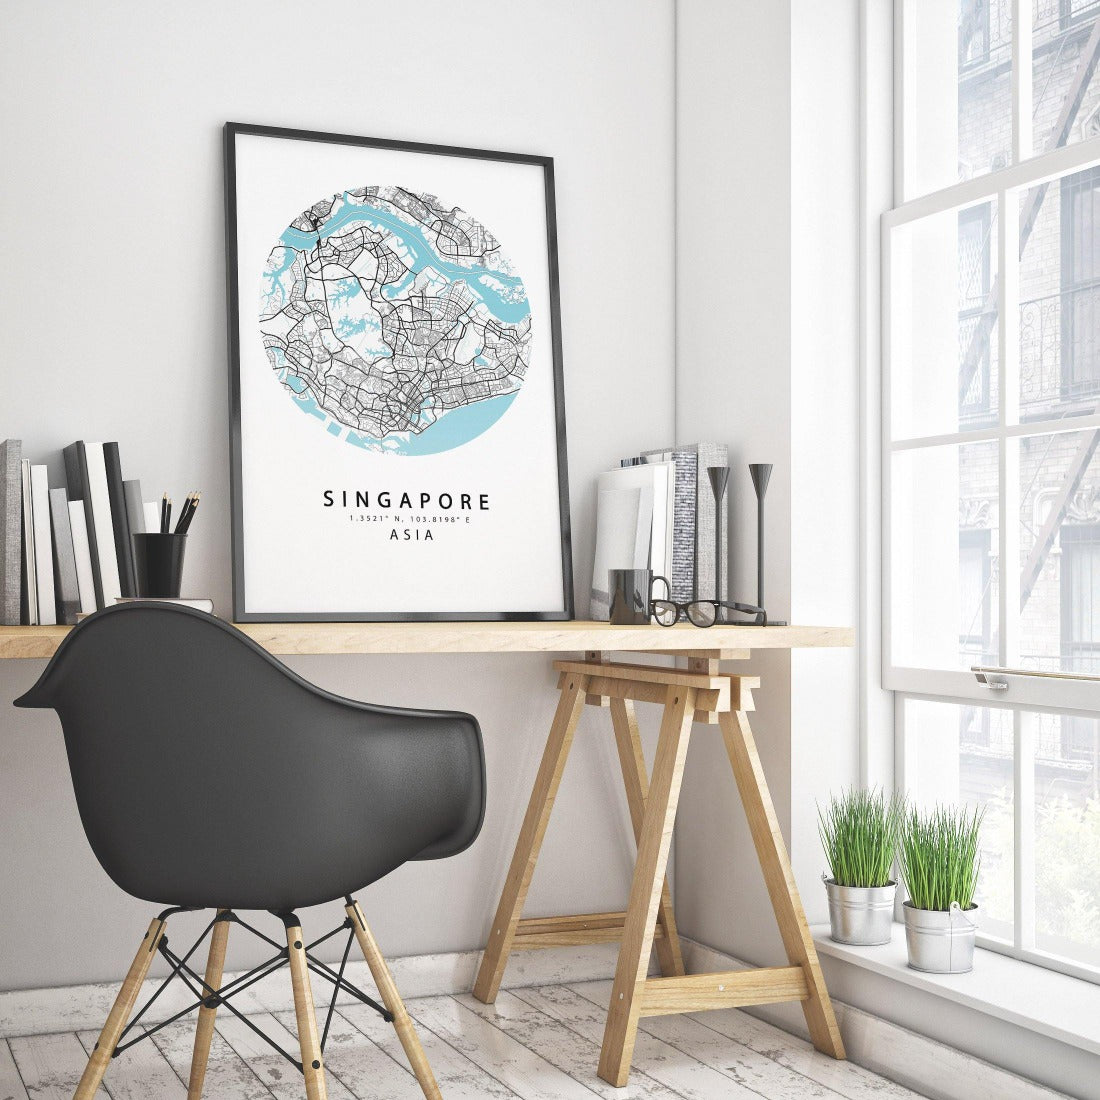 This intricately designed map captures the beauty and essence of Singapore. From its iconic buildings to its lush greenery, this map print is the perfect way to bring a touch of Singapore into your home. Whether you're a native looking to show your love for your home city, or a traveler looking for a unique souvenir, this map print is a must-have for anyone with a connection to Singapore.